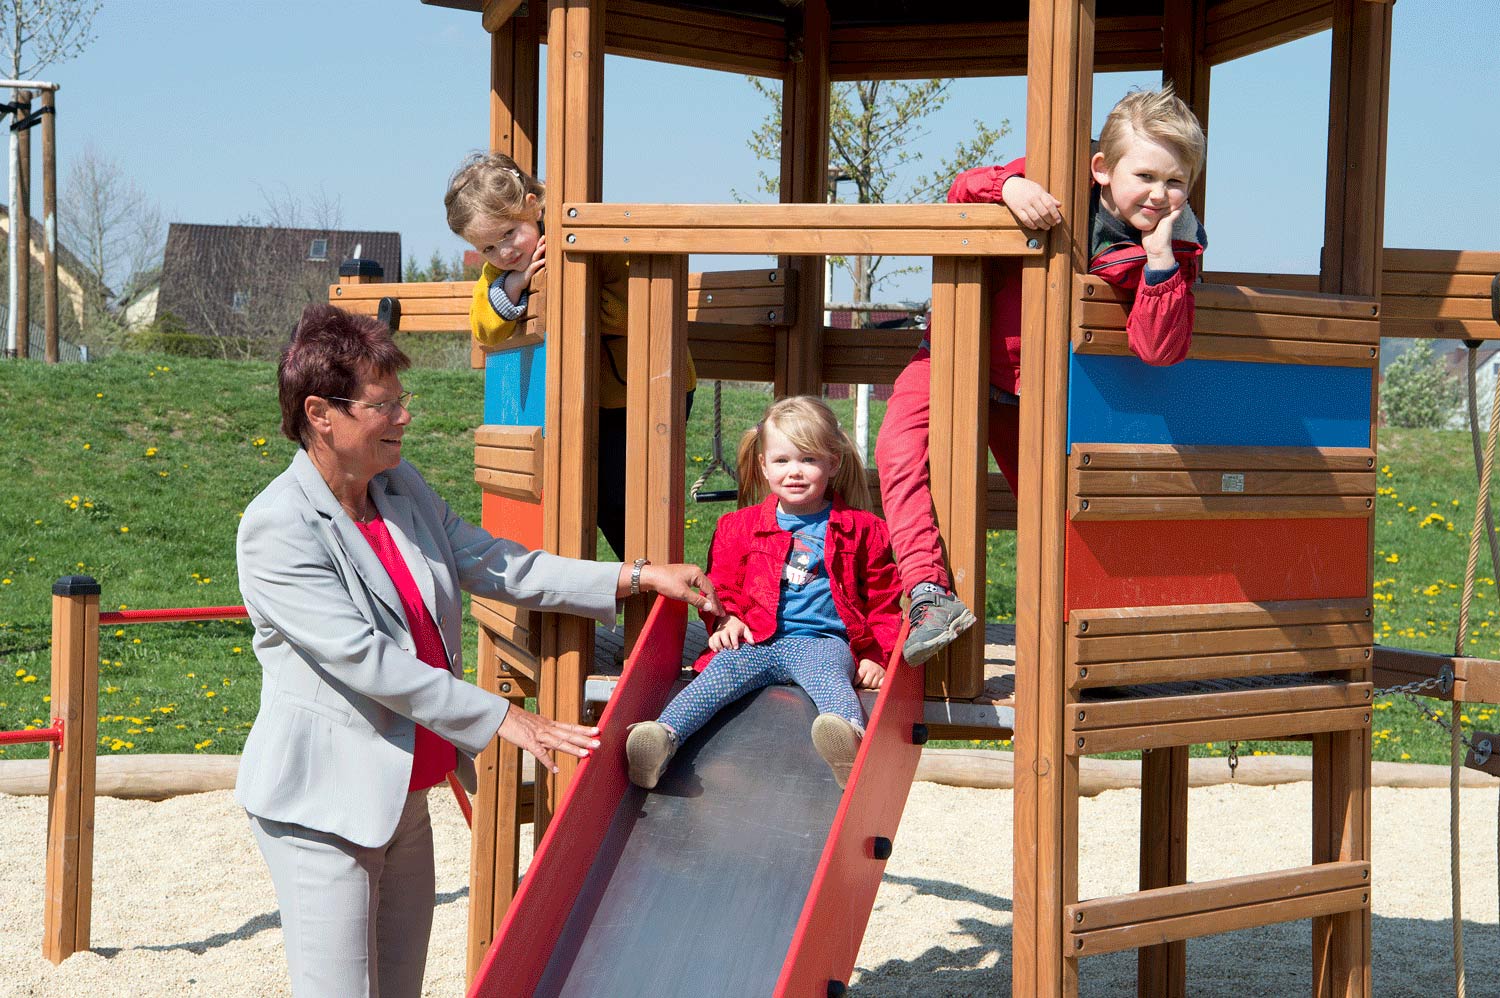 Company founder Dr Ute Bergner with children in the playground